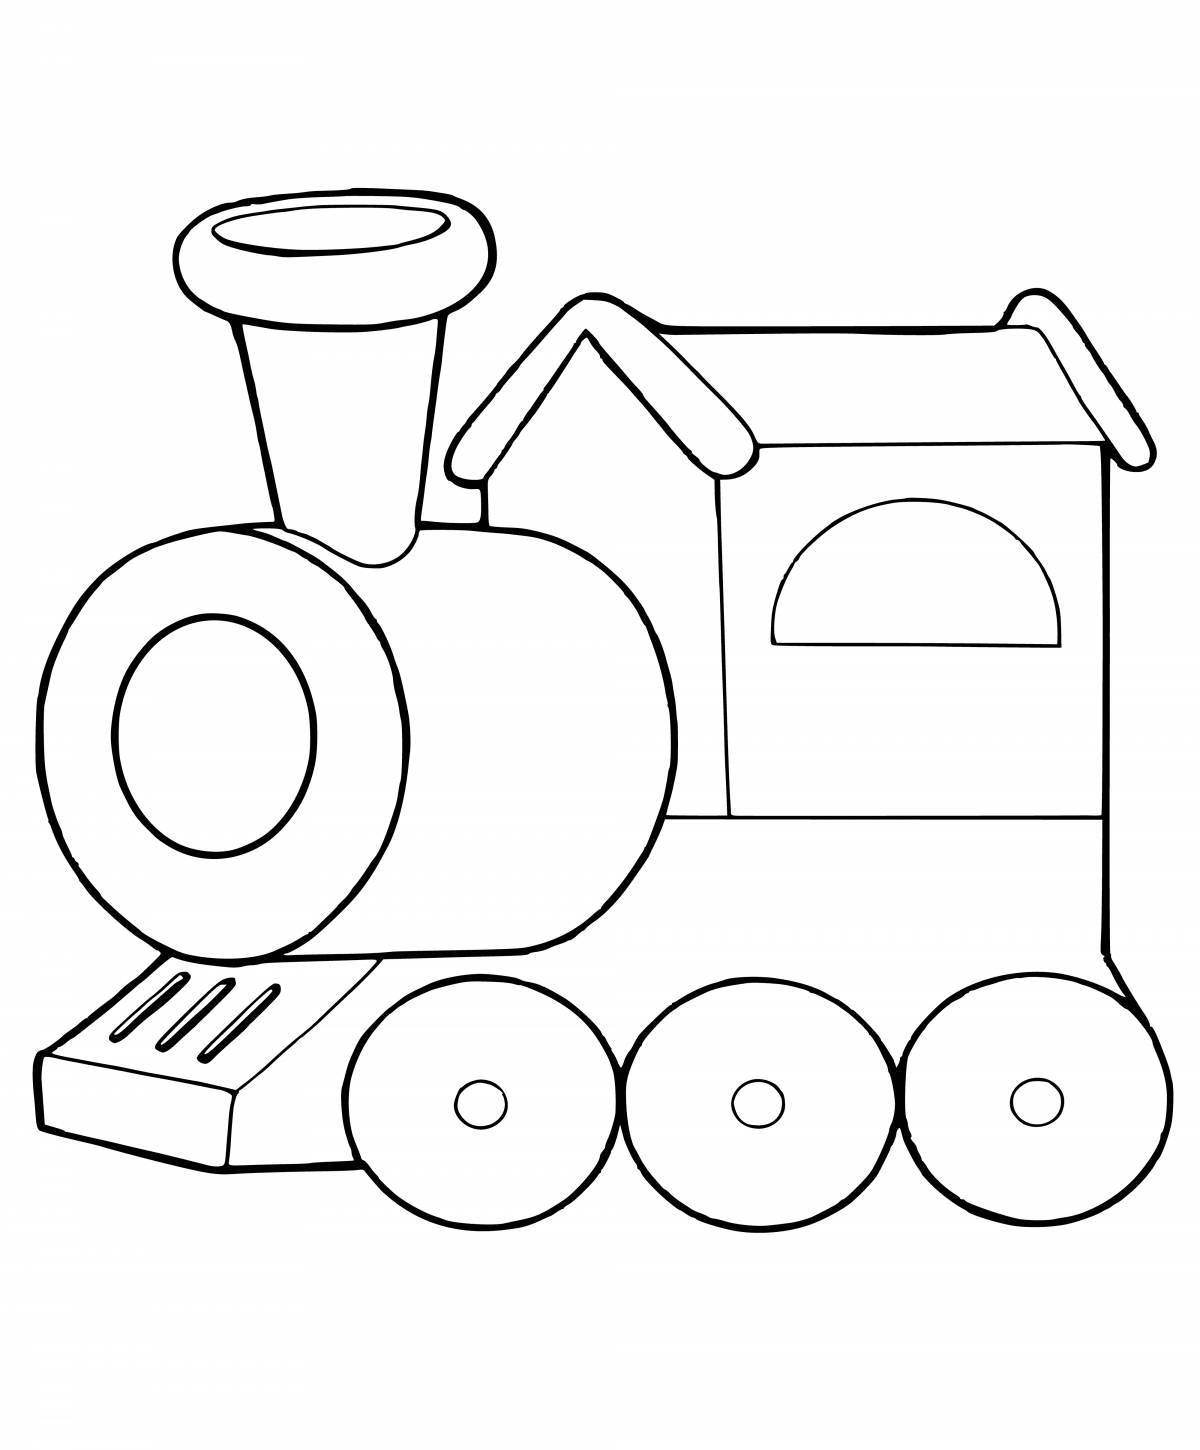 Glorious train coloring book for kids